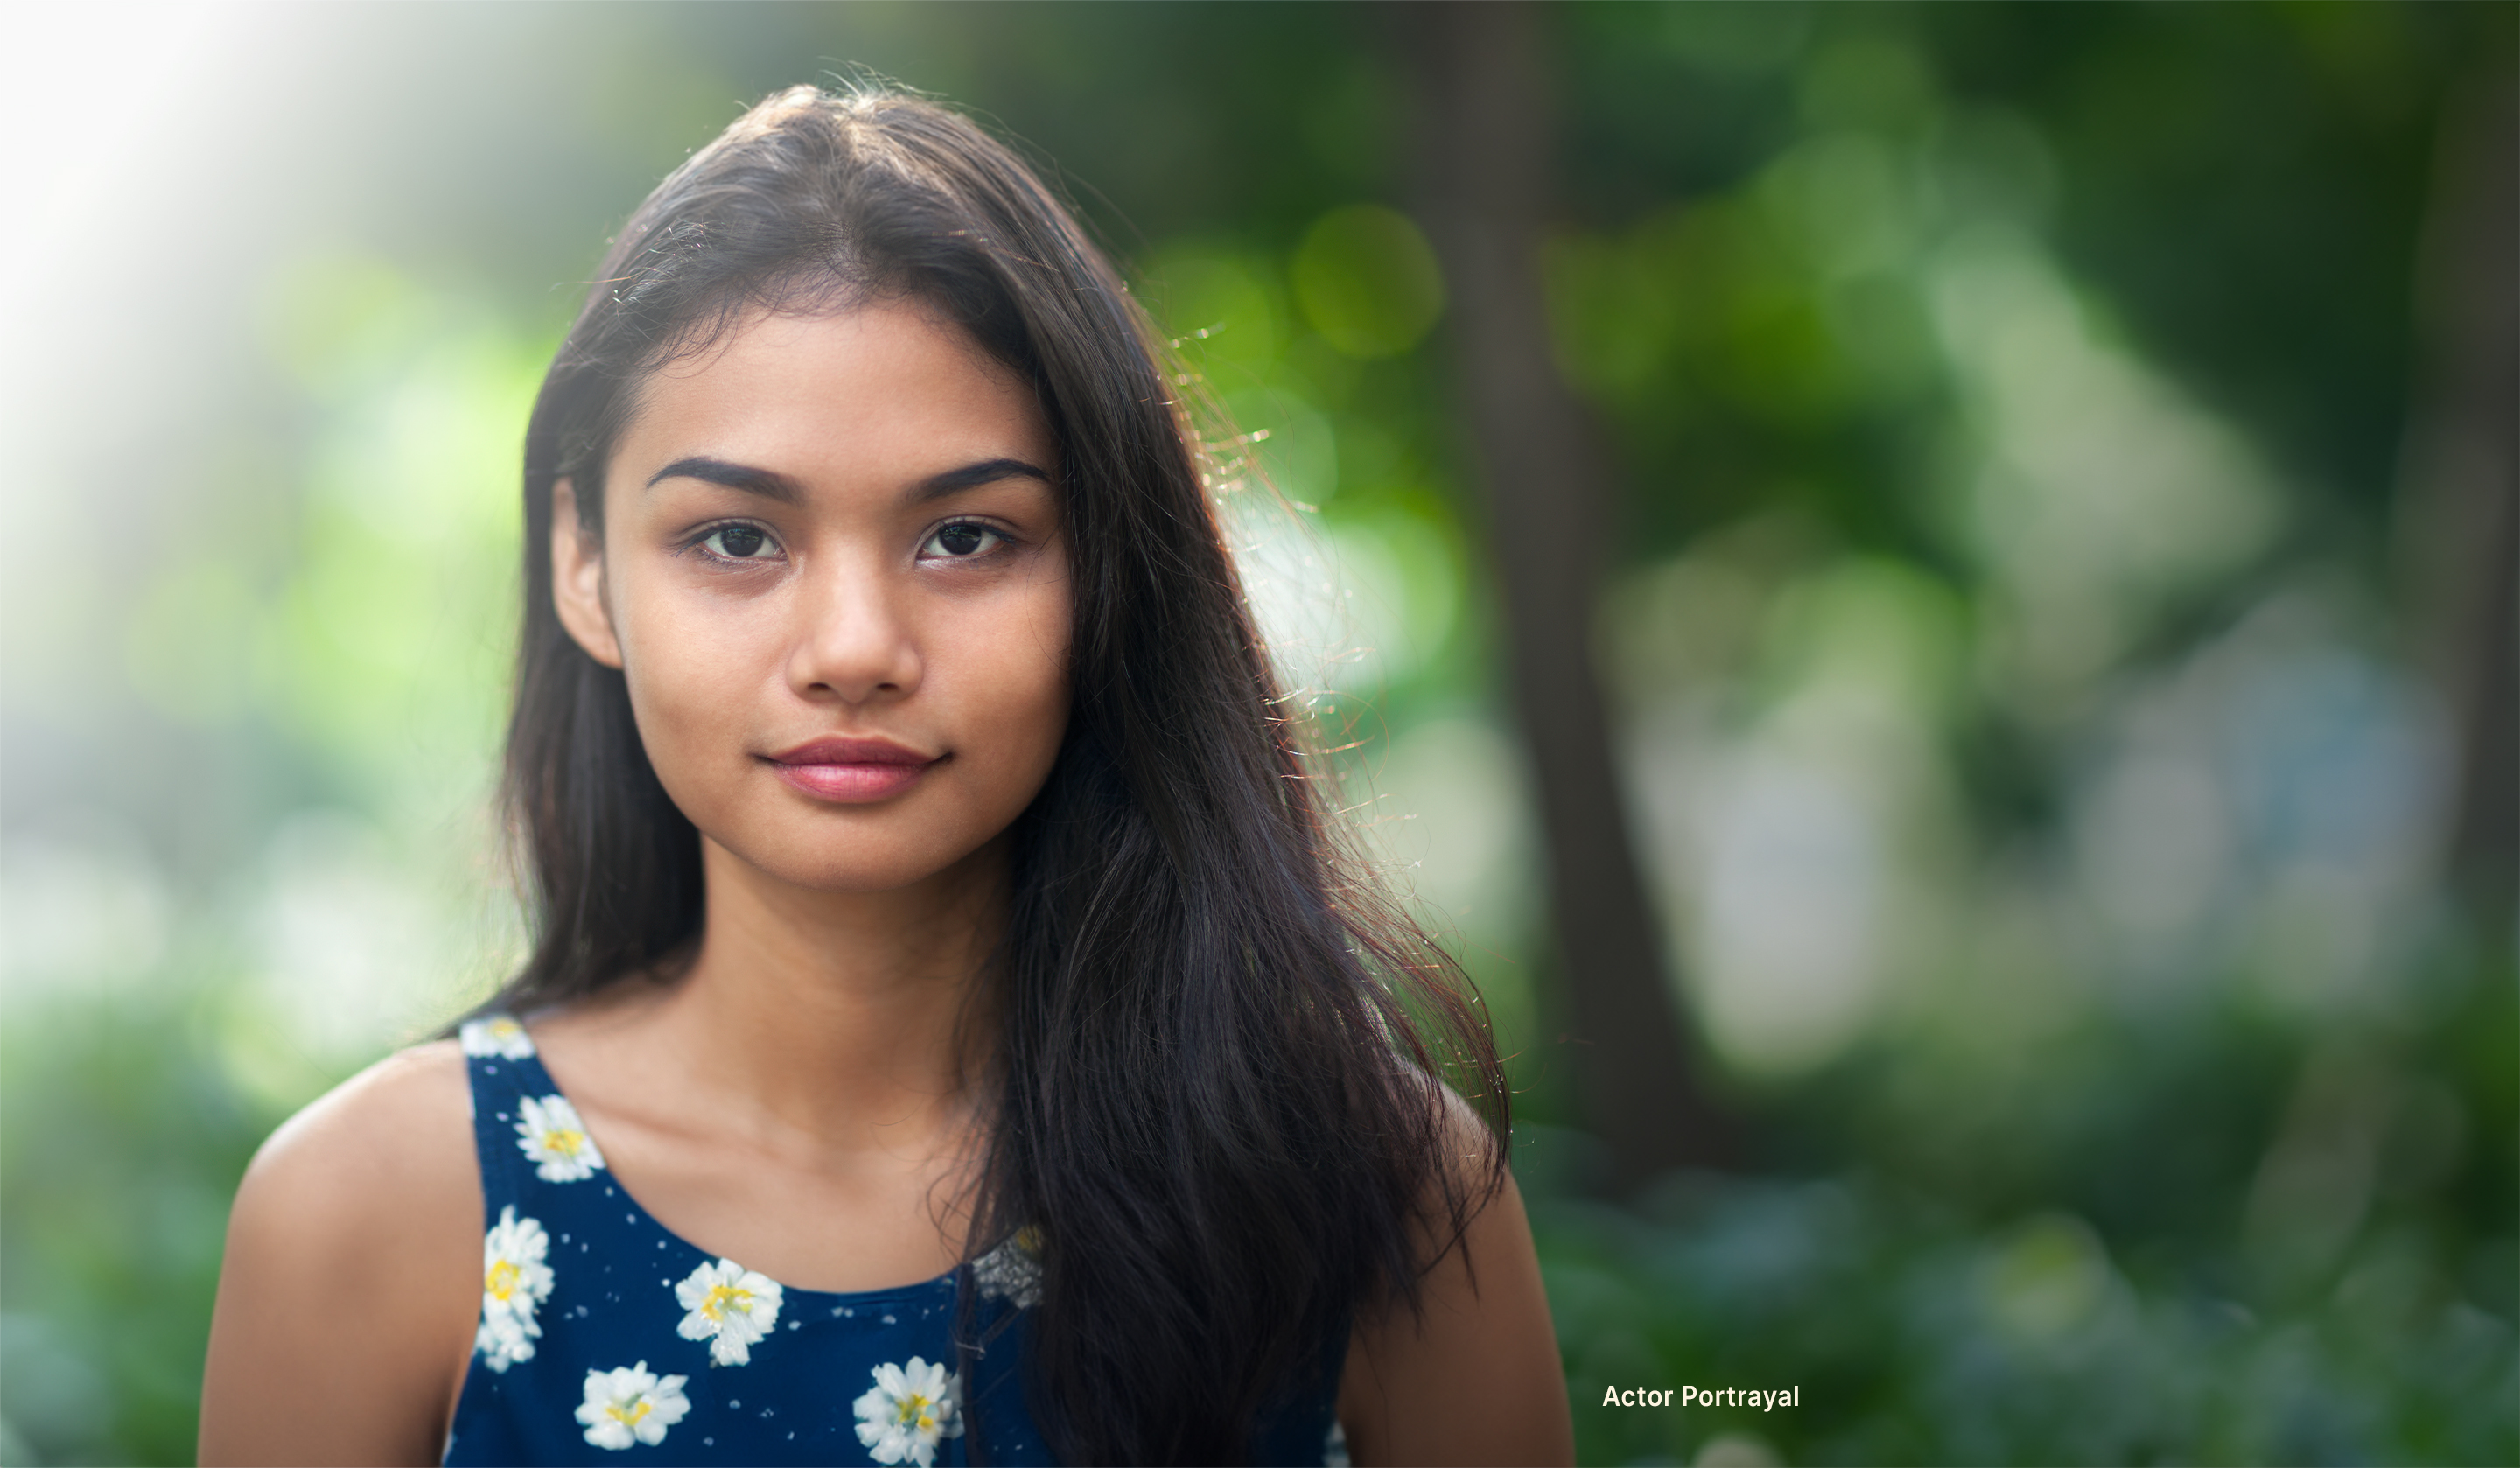 Actor Portrayal; A young Southeast Asian adult woman, in a floral top, slightly smiling while contemplating cervical cancer and HPV infections in women.